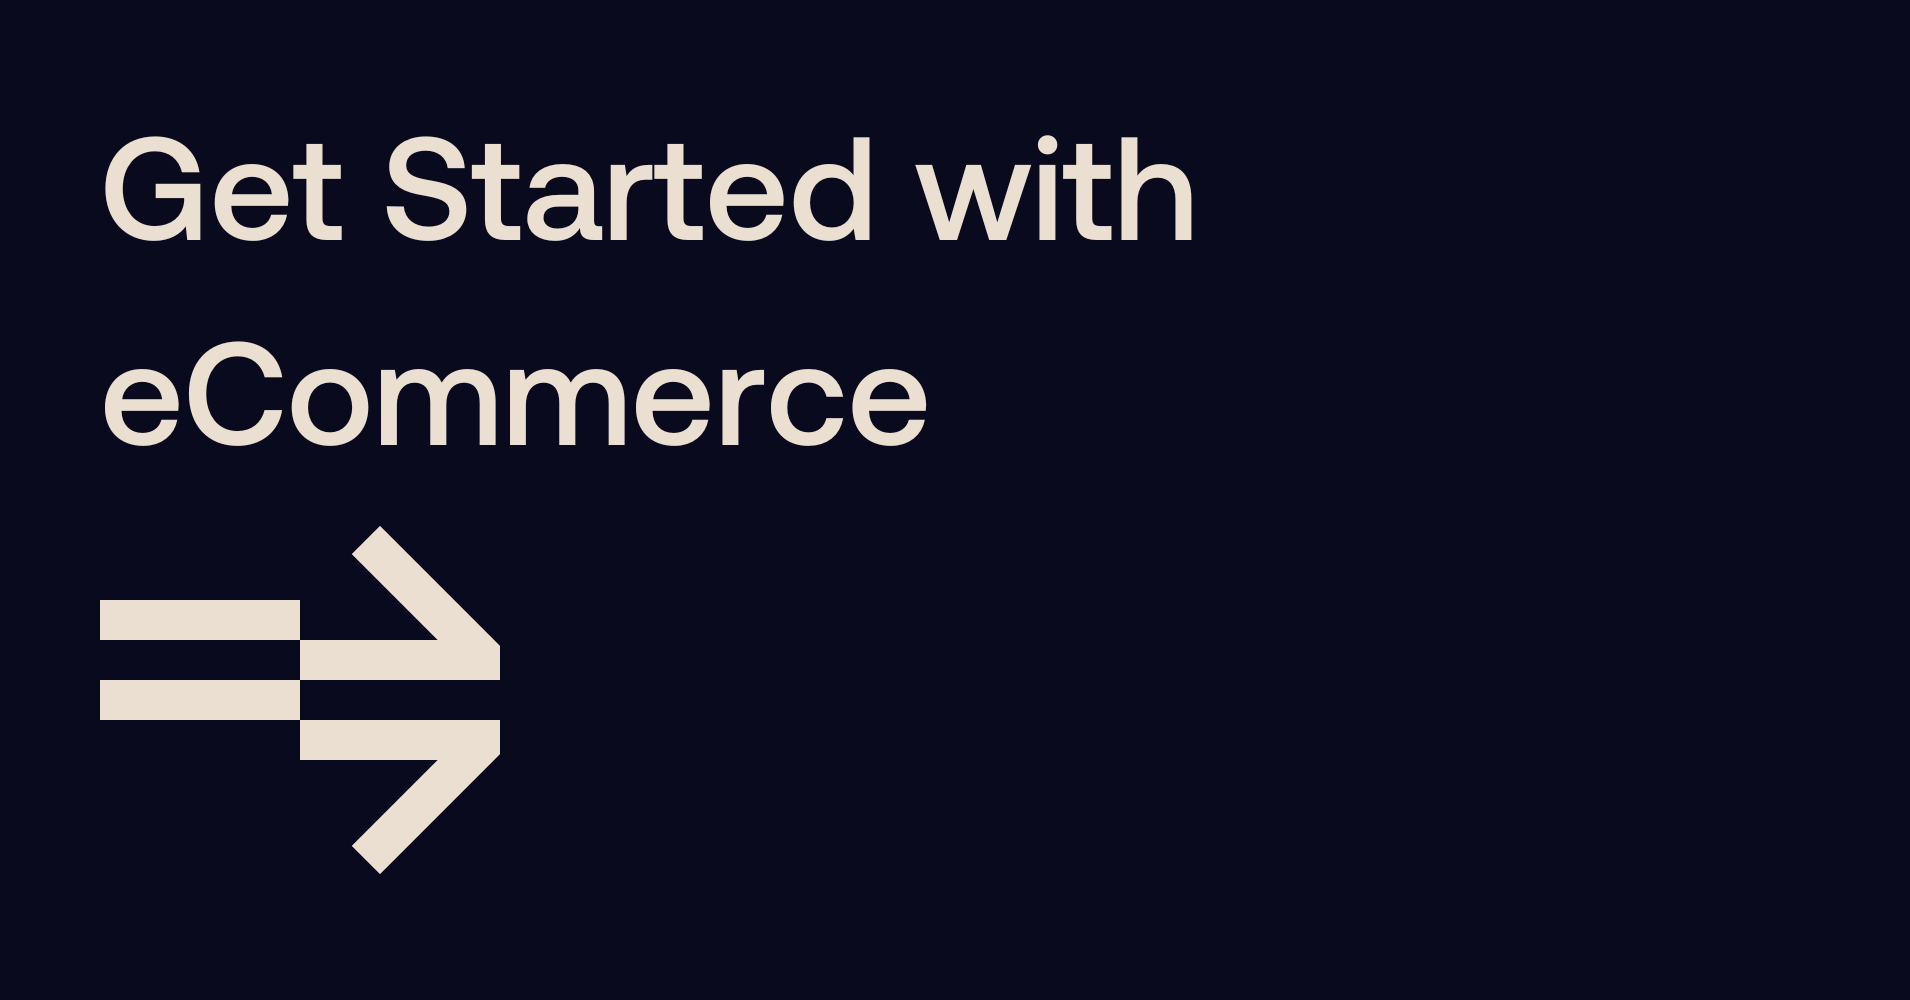 Get started with eCommerce